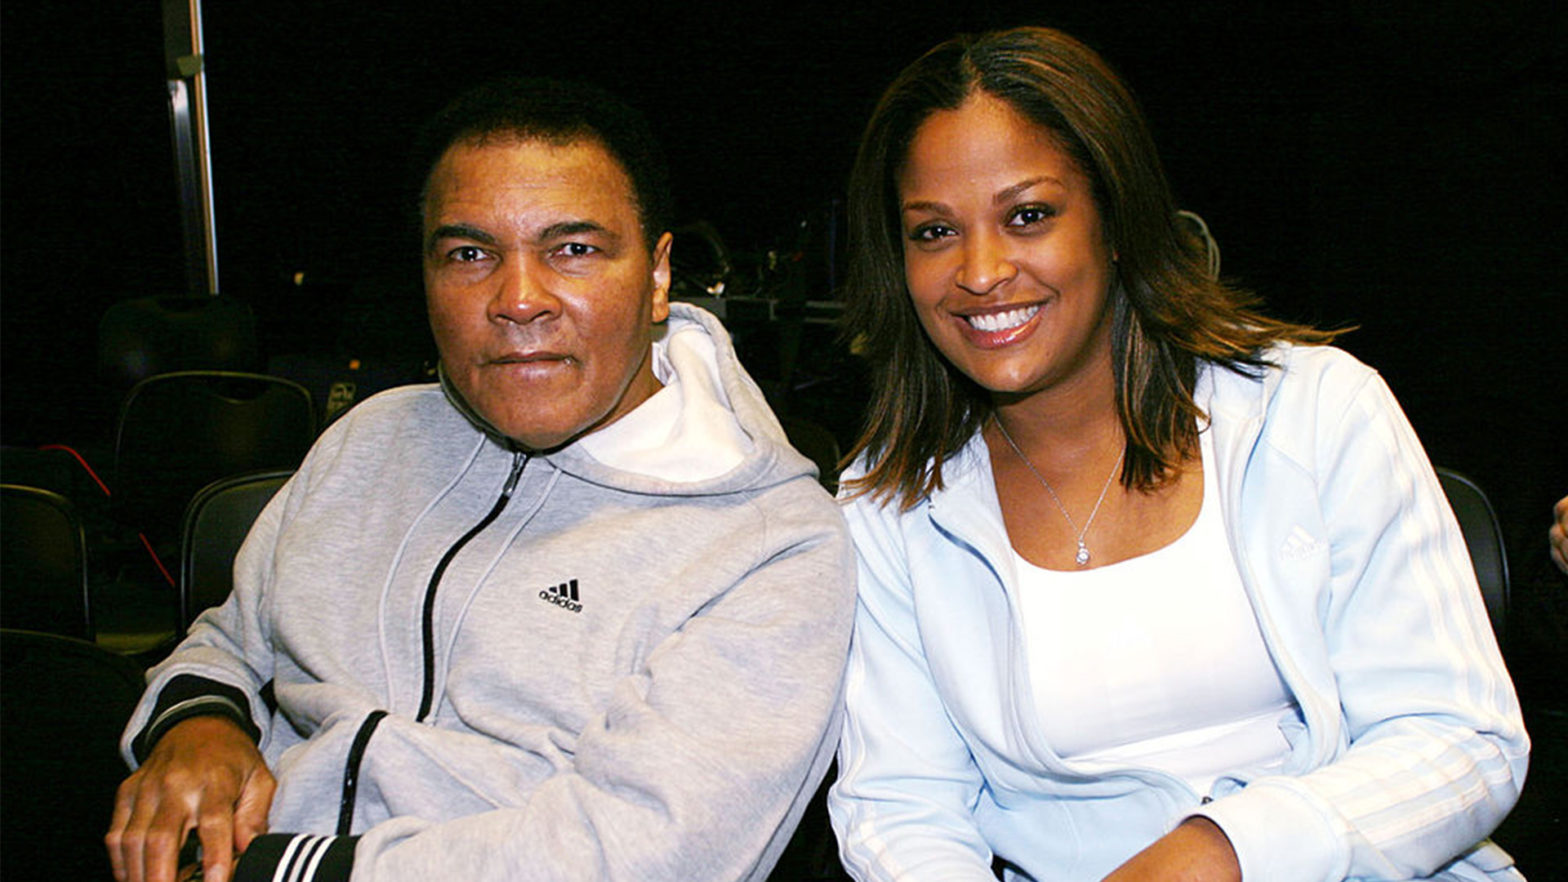 Laila Ali Hit With Notice Of Opposition For A Pending Trademark From The Company That Owns Her Father's Likeness